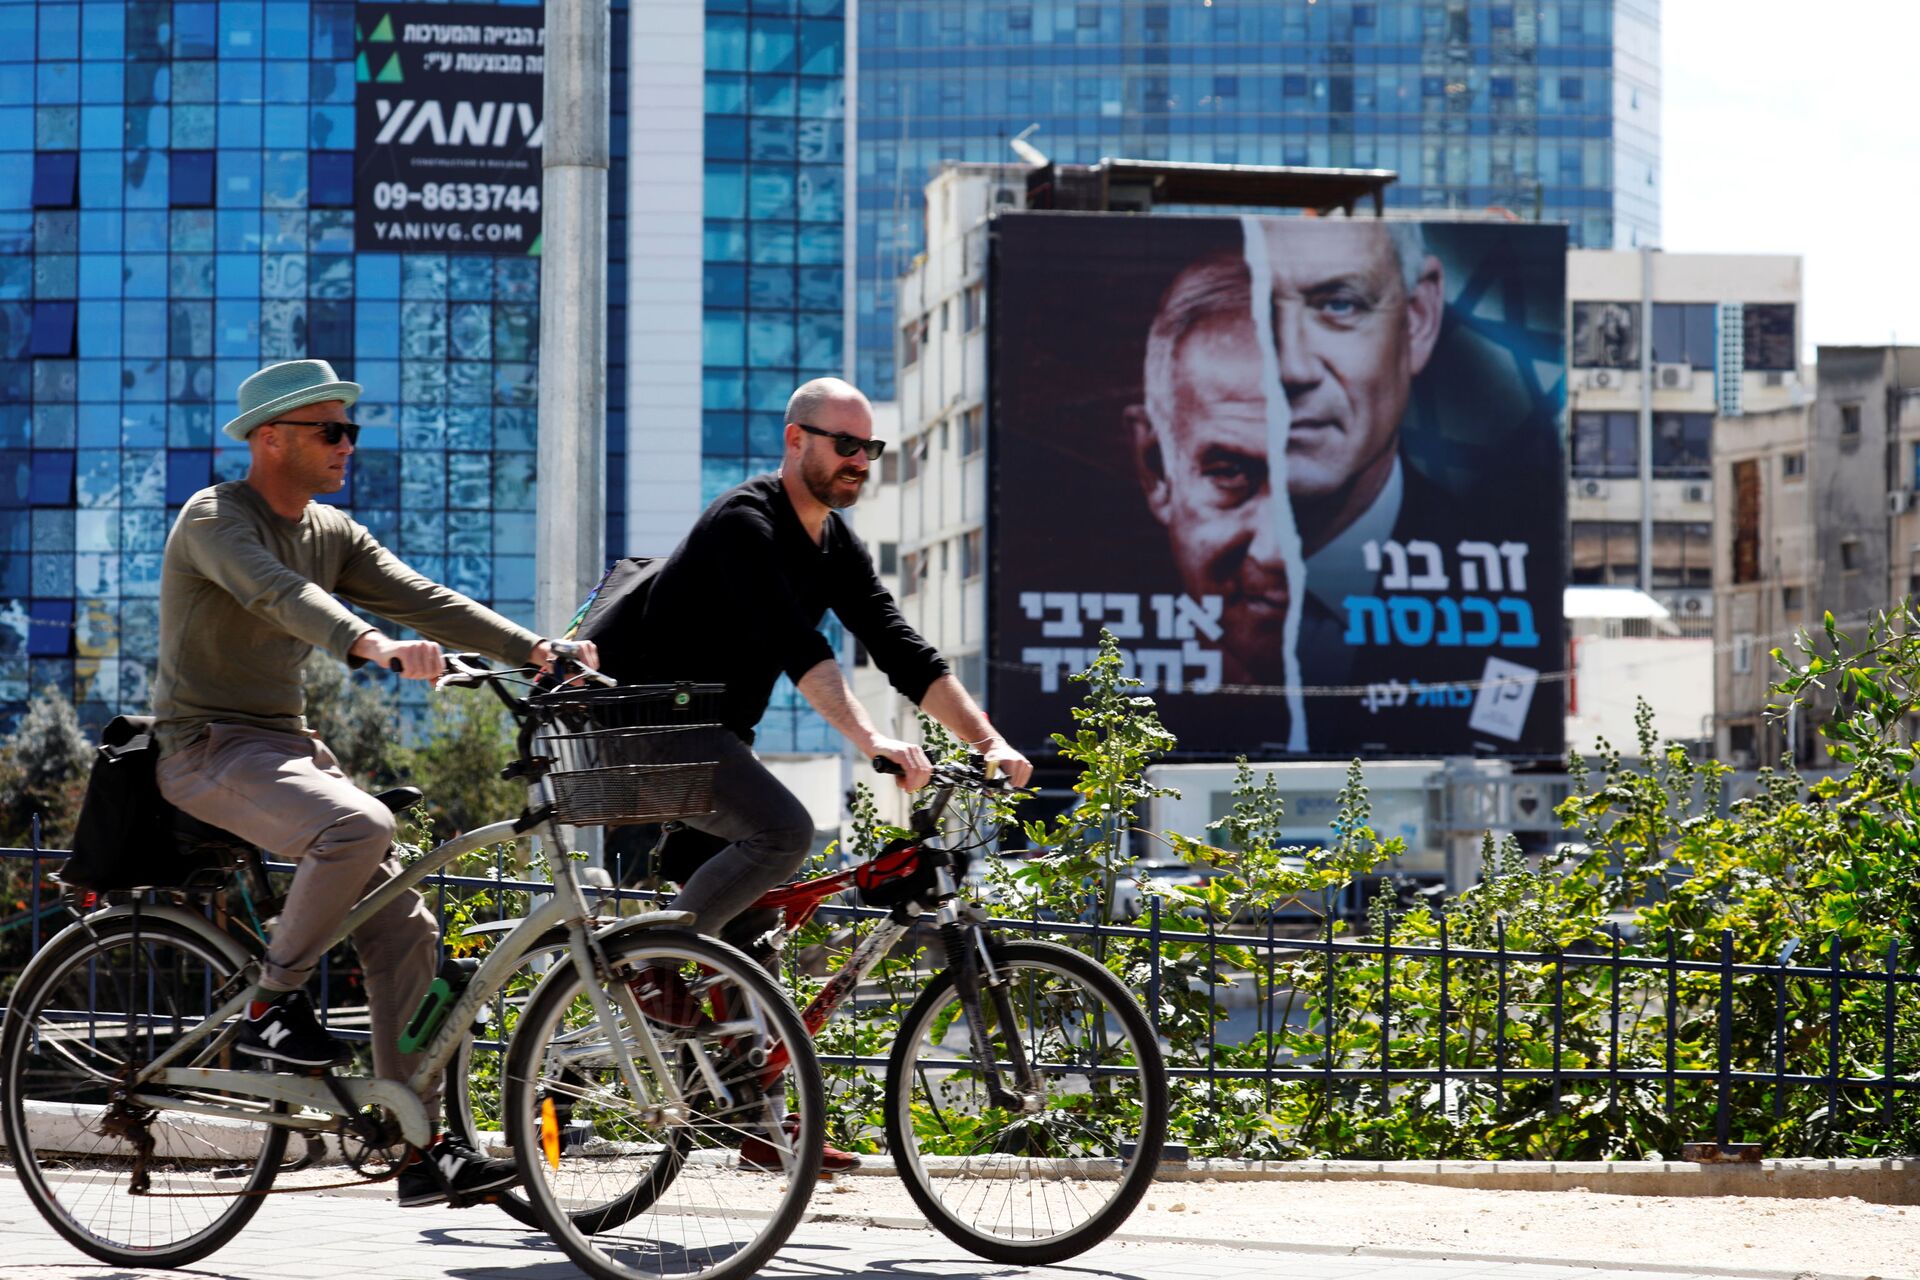 Egypt and Jordan Eye Israel's Elections Closely, as Israelis Go to Polls for 4th Time in 2 Years - Sputnik International, 1920, 23.03.2021